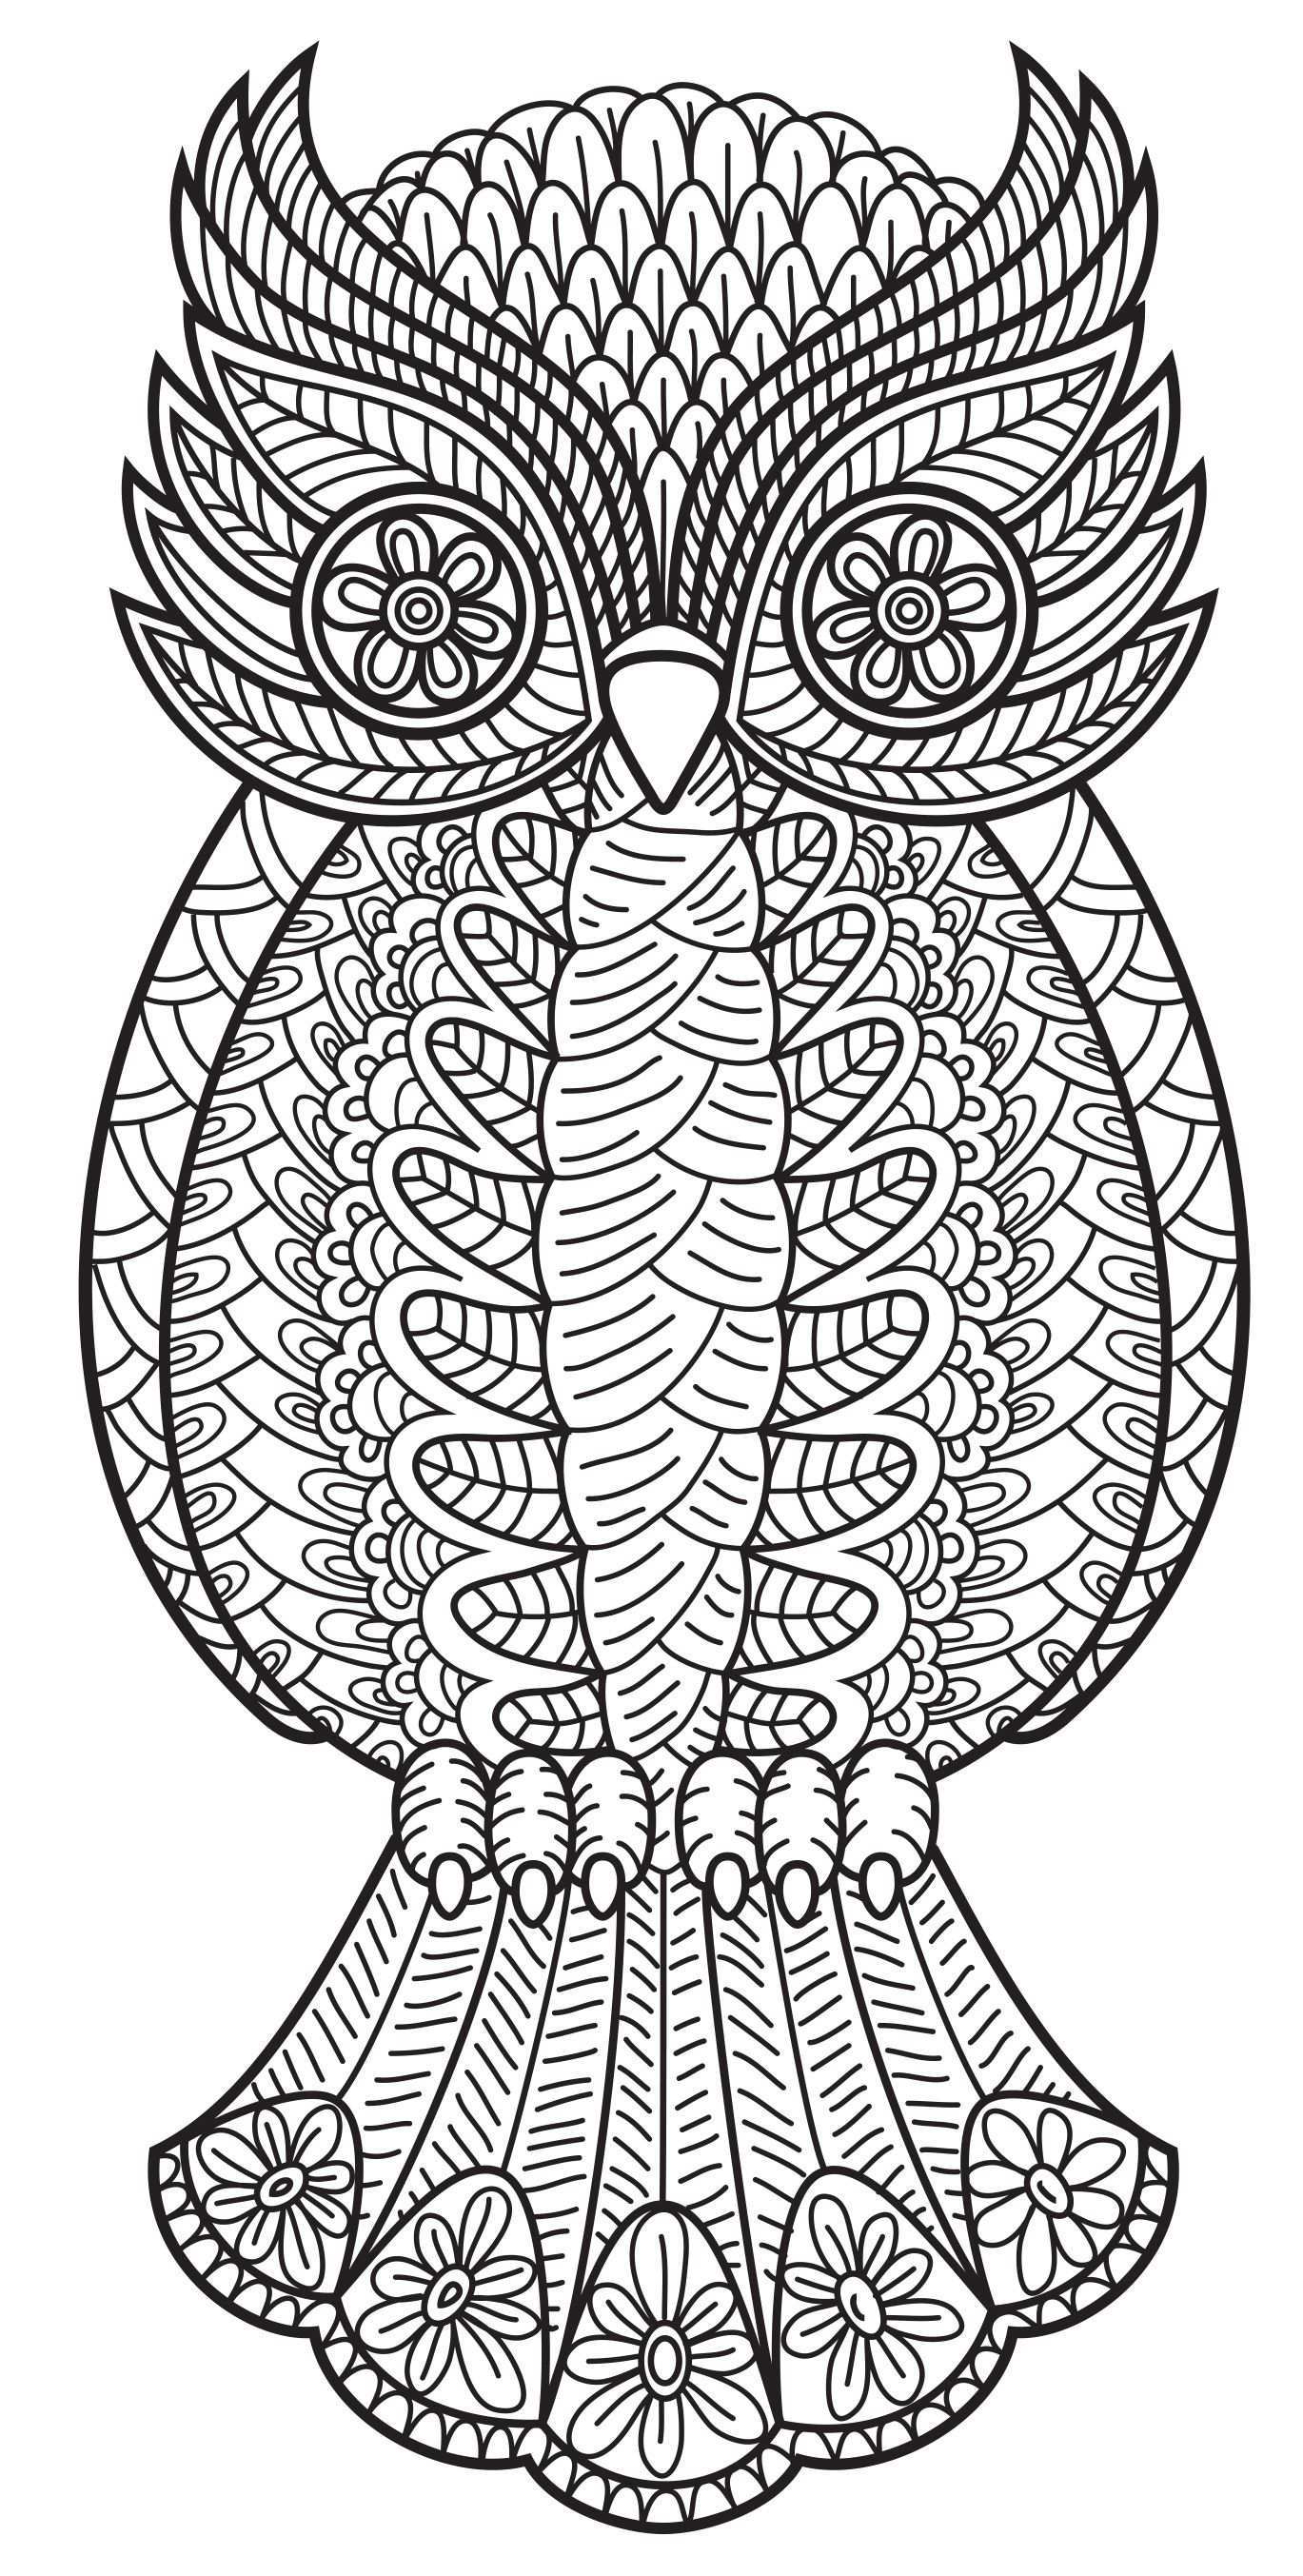 Pattern Coloring Books Owl Coloring Pages Animal Coloring Pages Coloring Pages